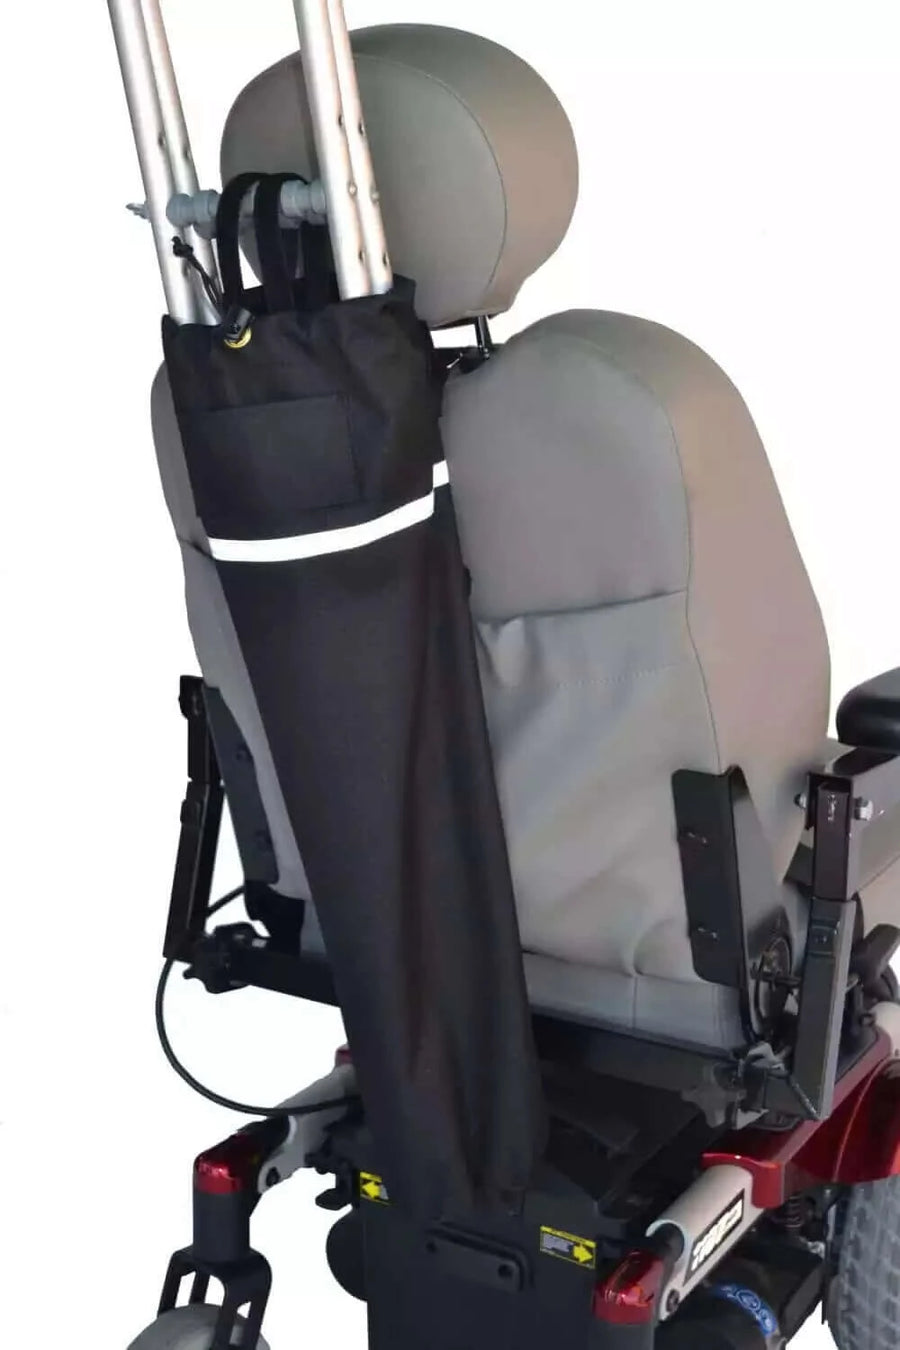 Diestco - Crutch Holder for Scooters & Powerchairs with white background